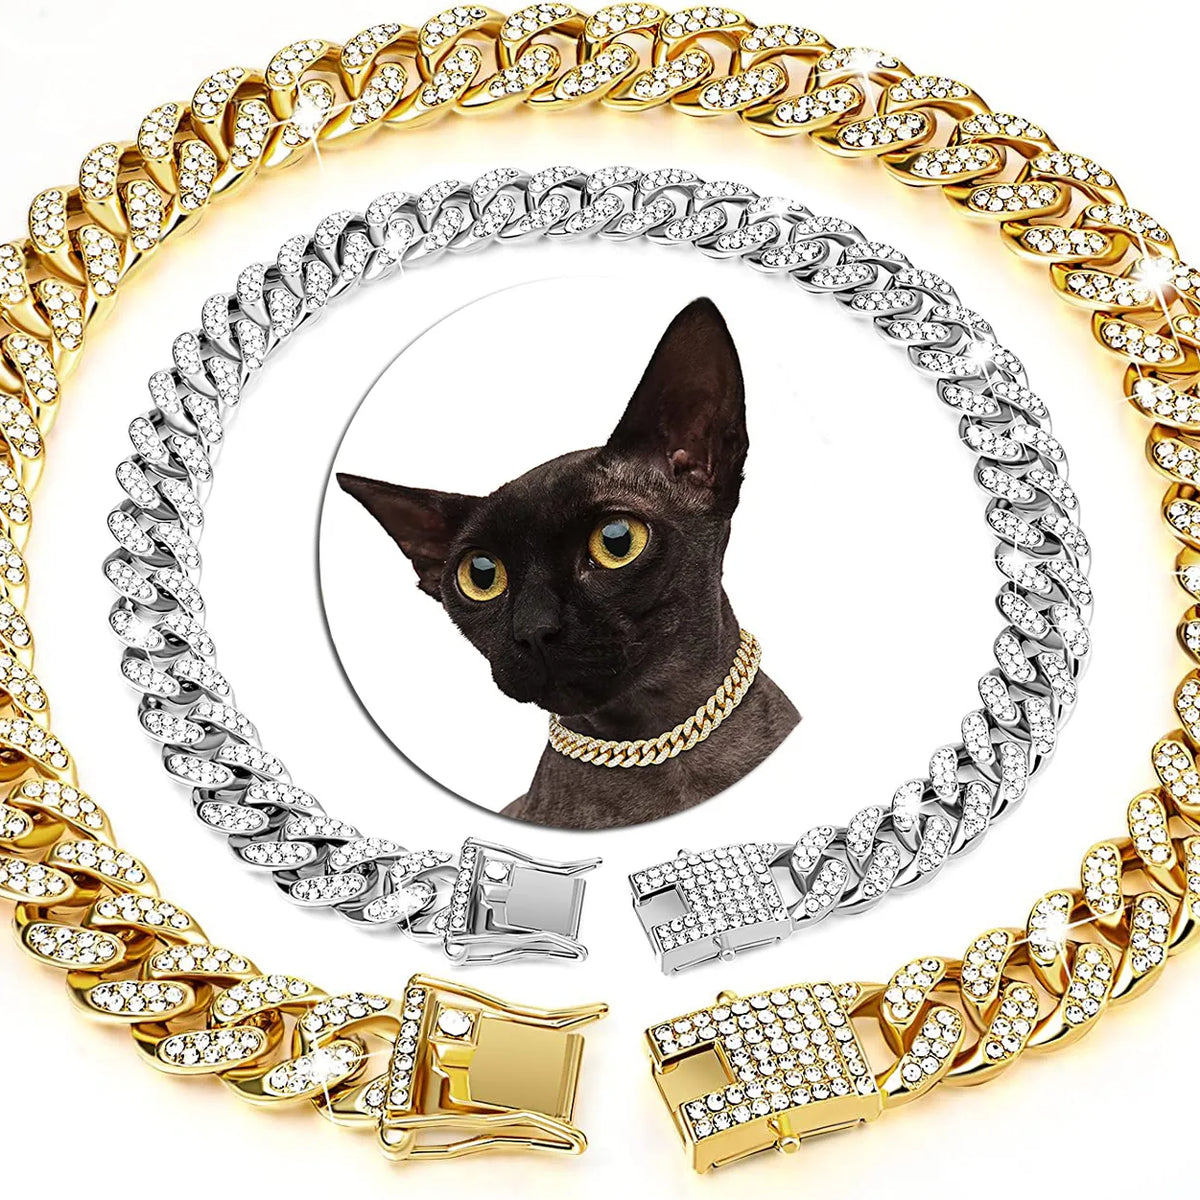 Elegance Unleashed: Luxury Rhinestone Necklace for Pets, Perfect for Wedding, Prom, or Costume Glam